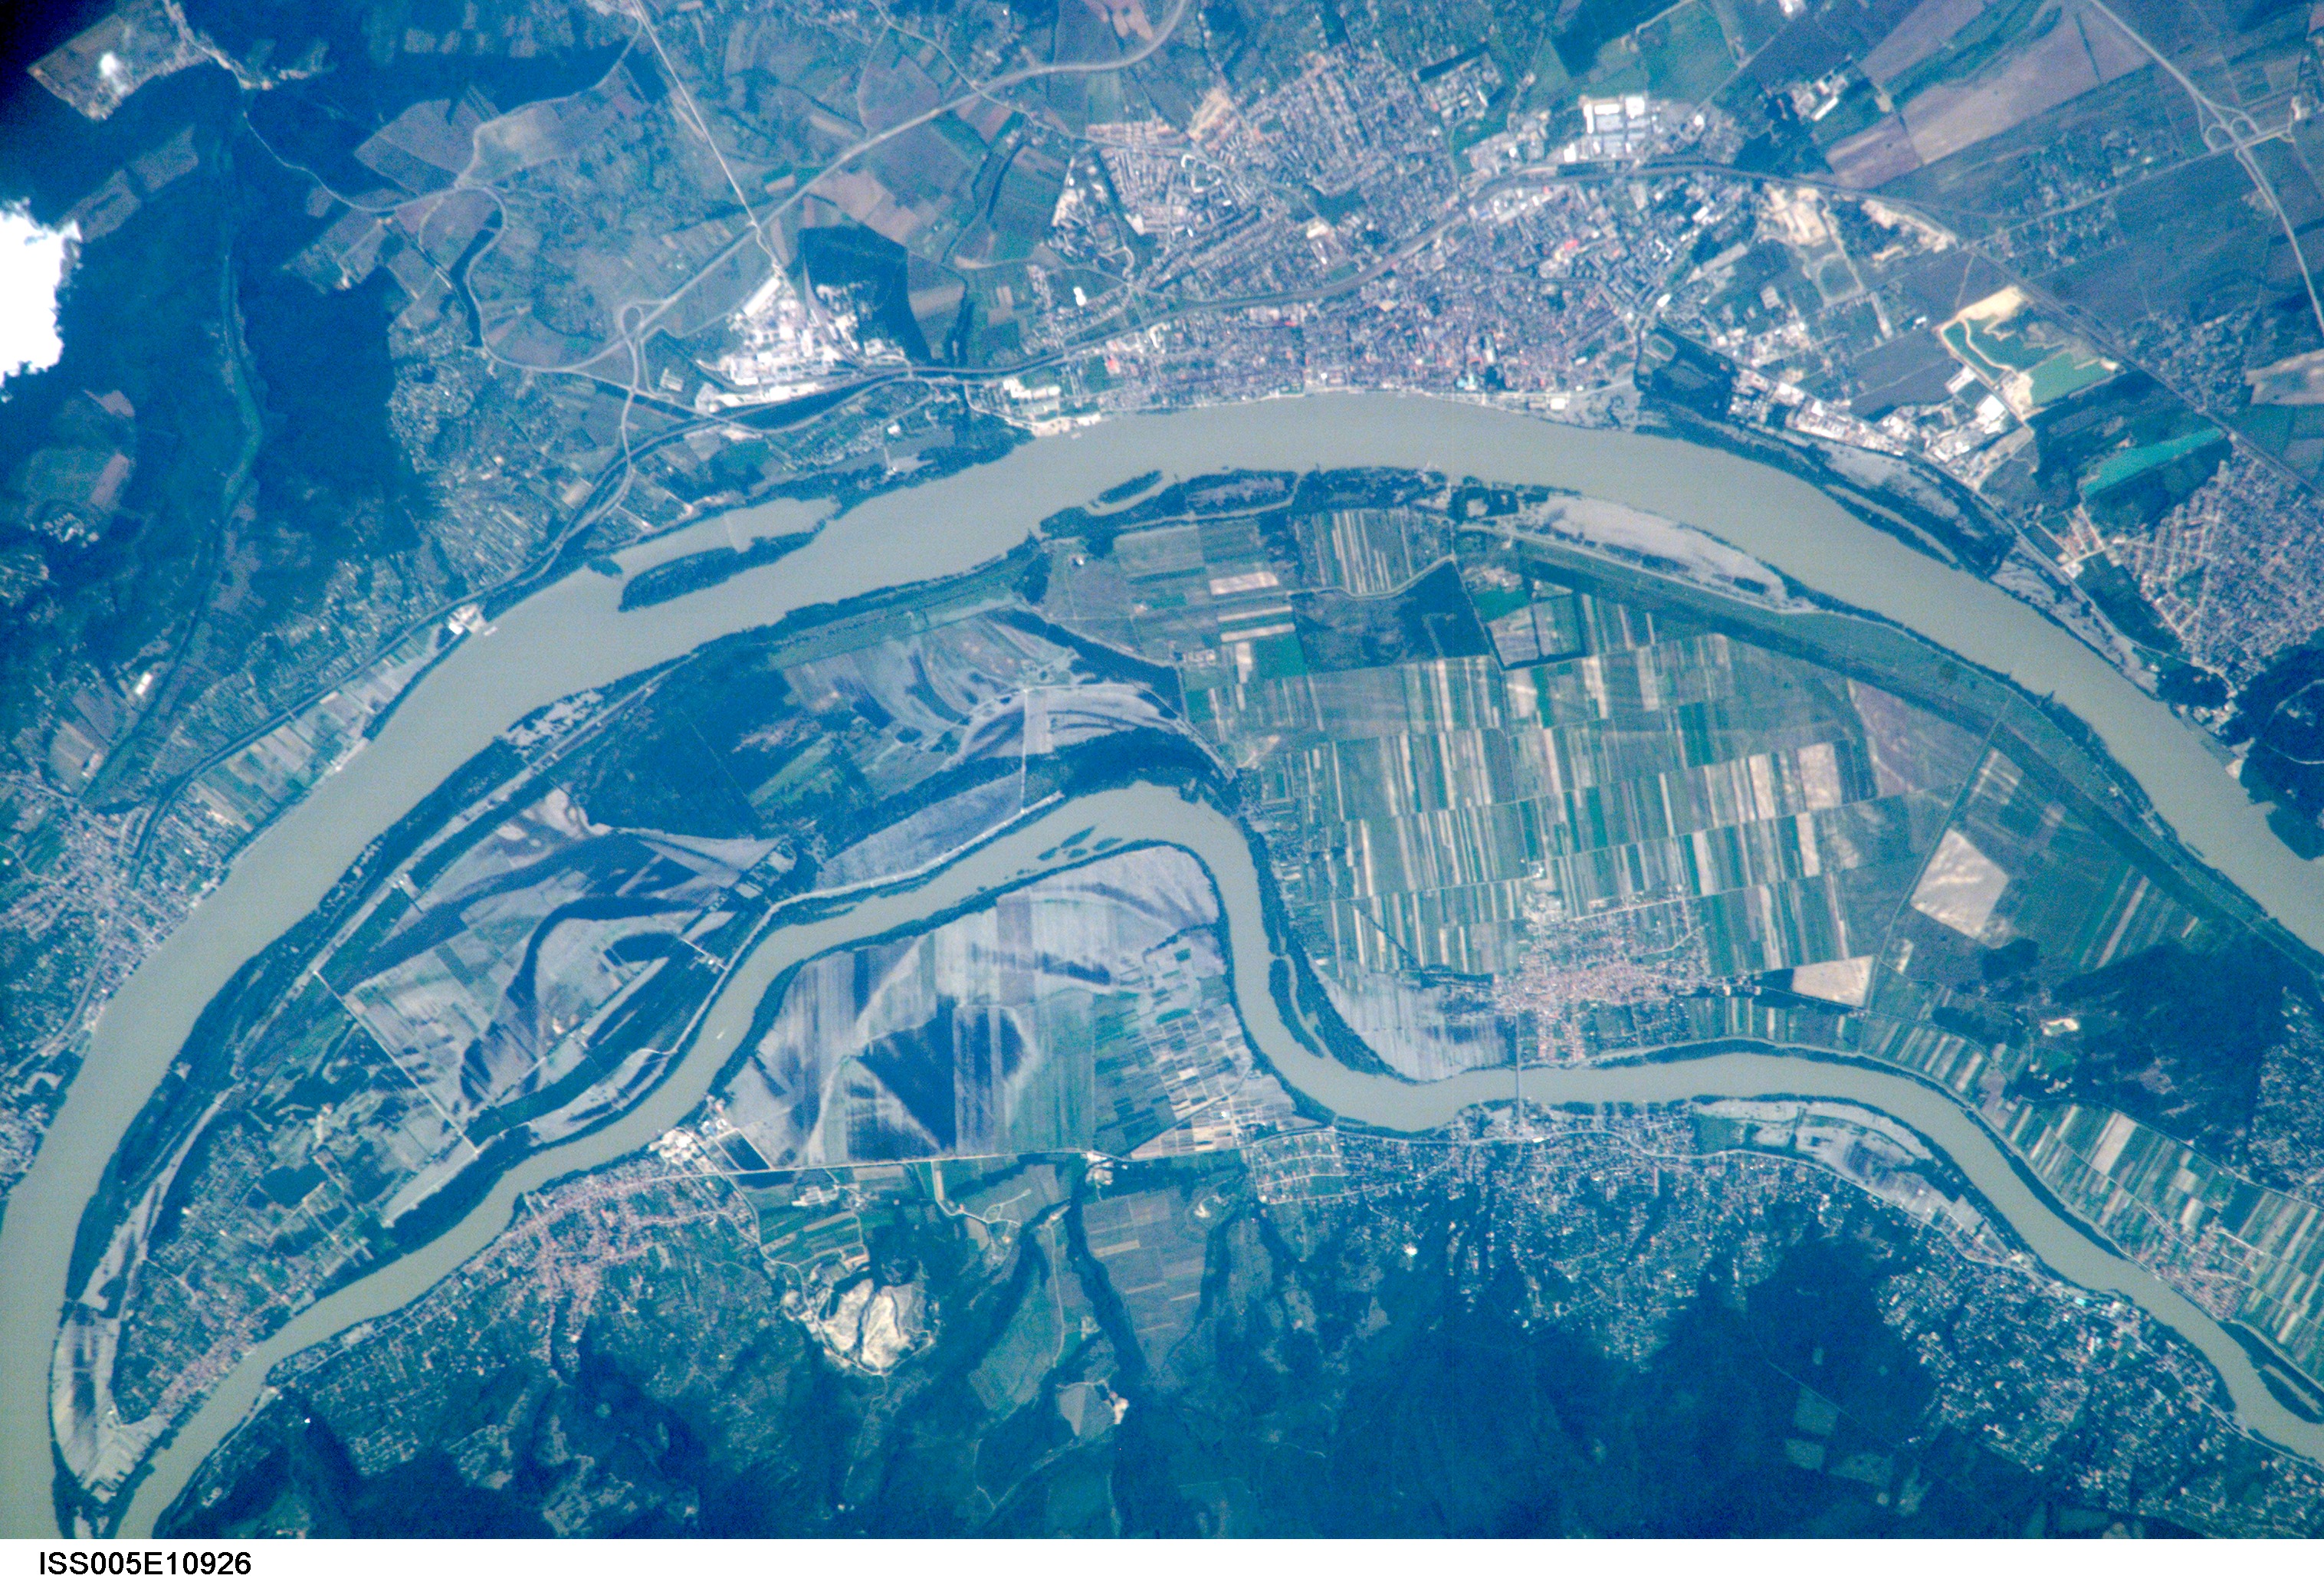 Danube River flooding near Vac, Hungary - related image preview